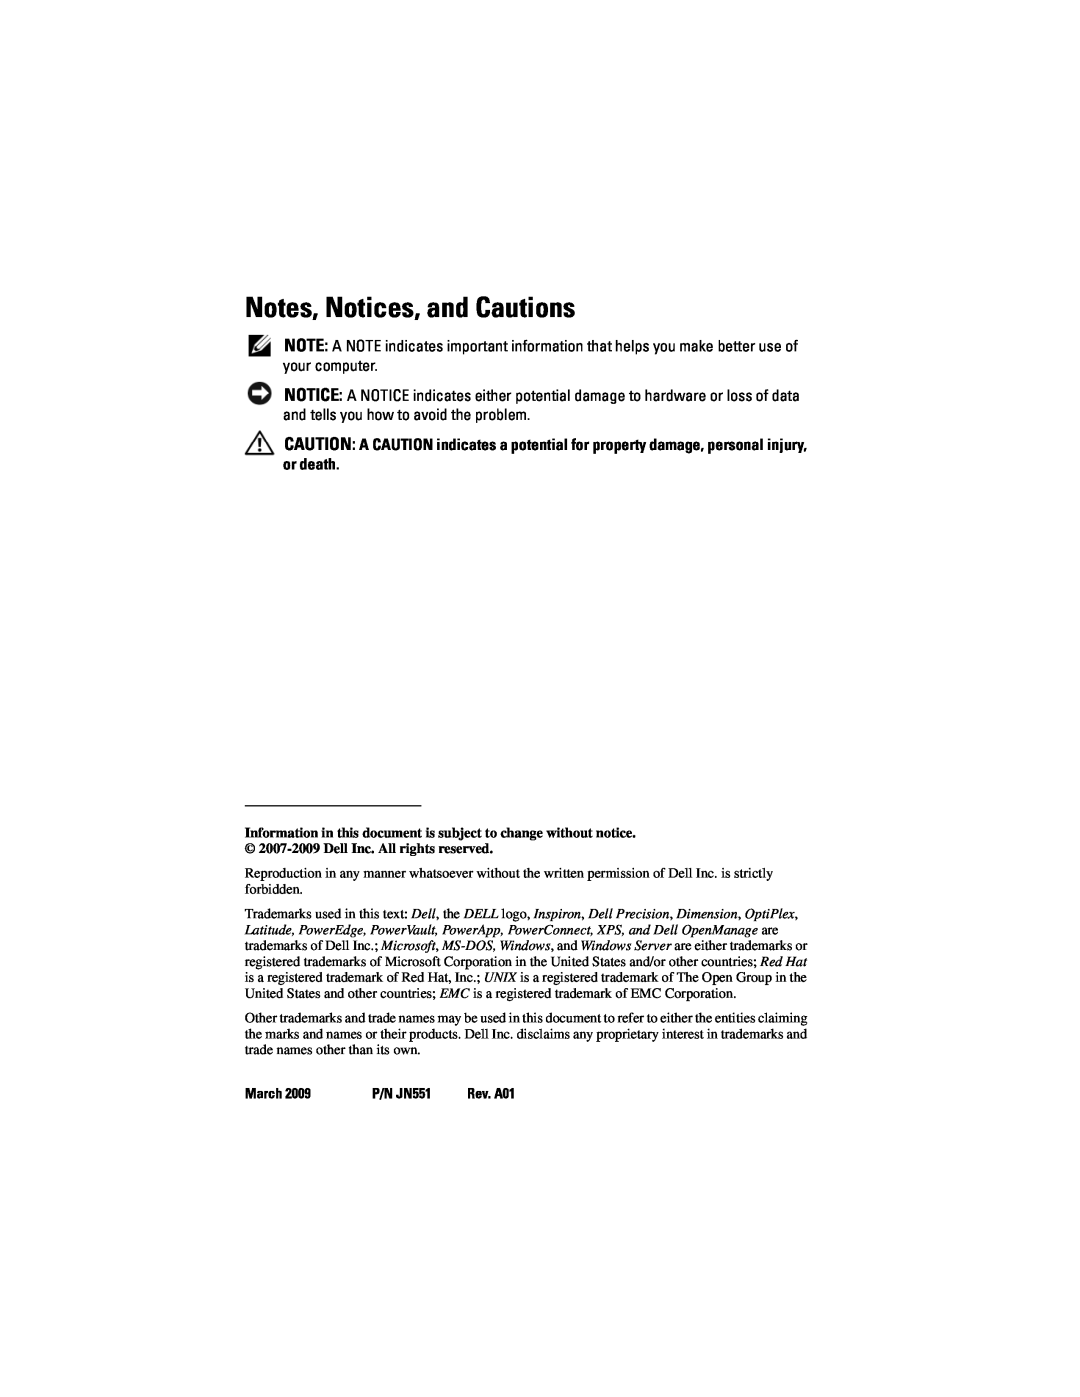 Dell T105 owner manual Notes, Notices, and Cautions, March, P/N JN551 